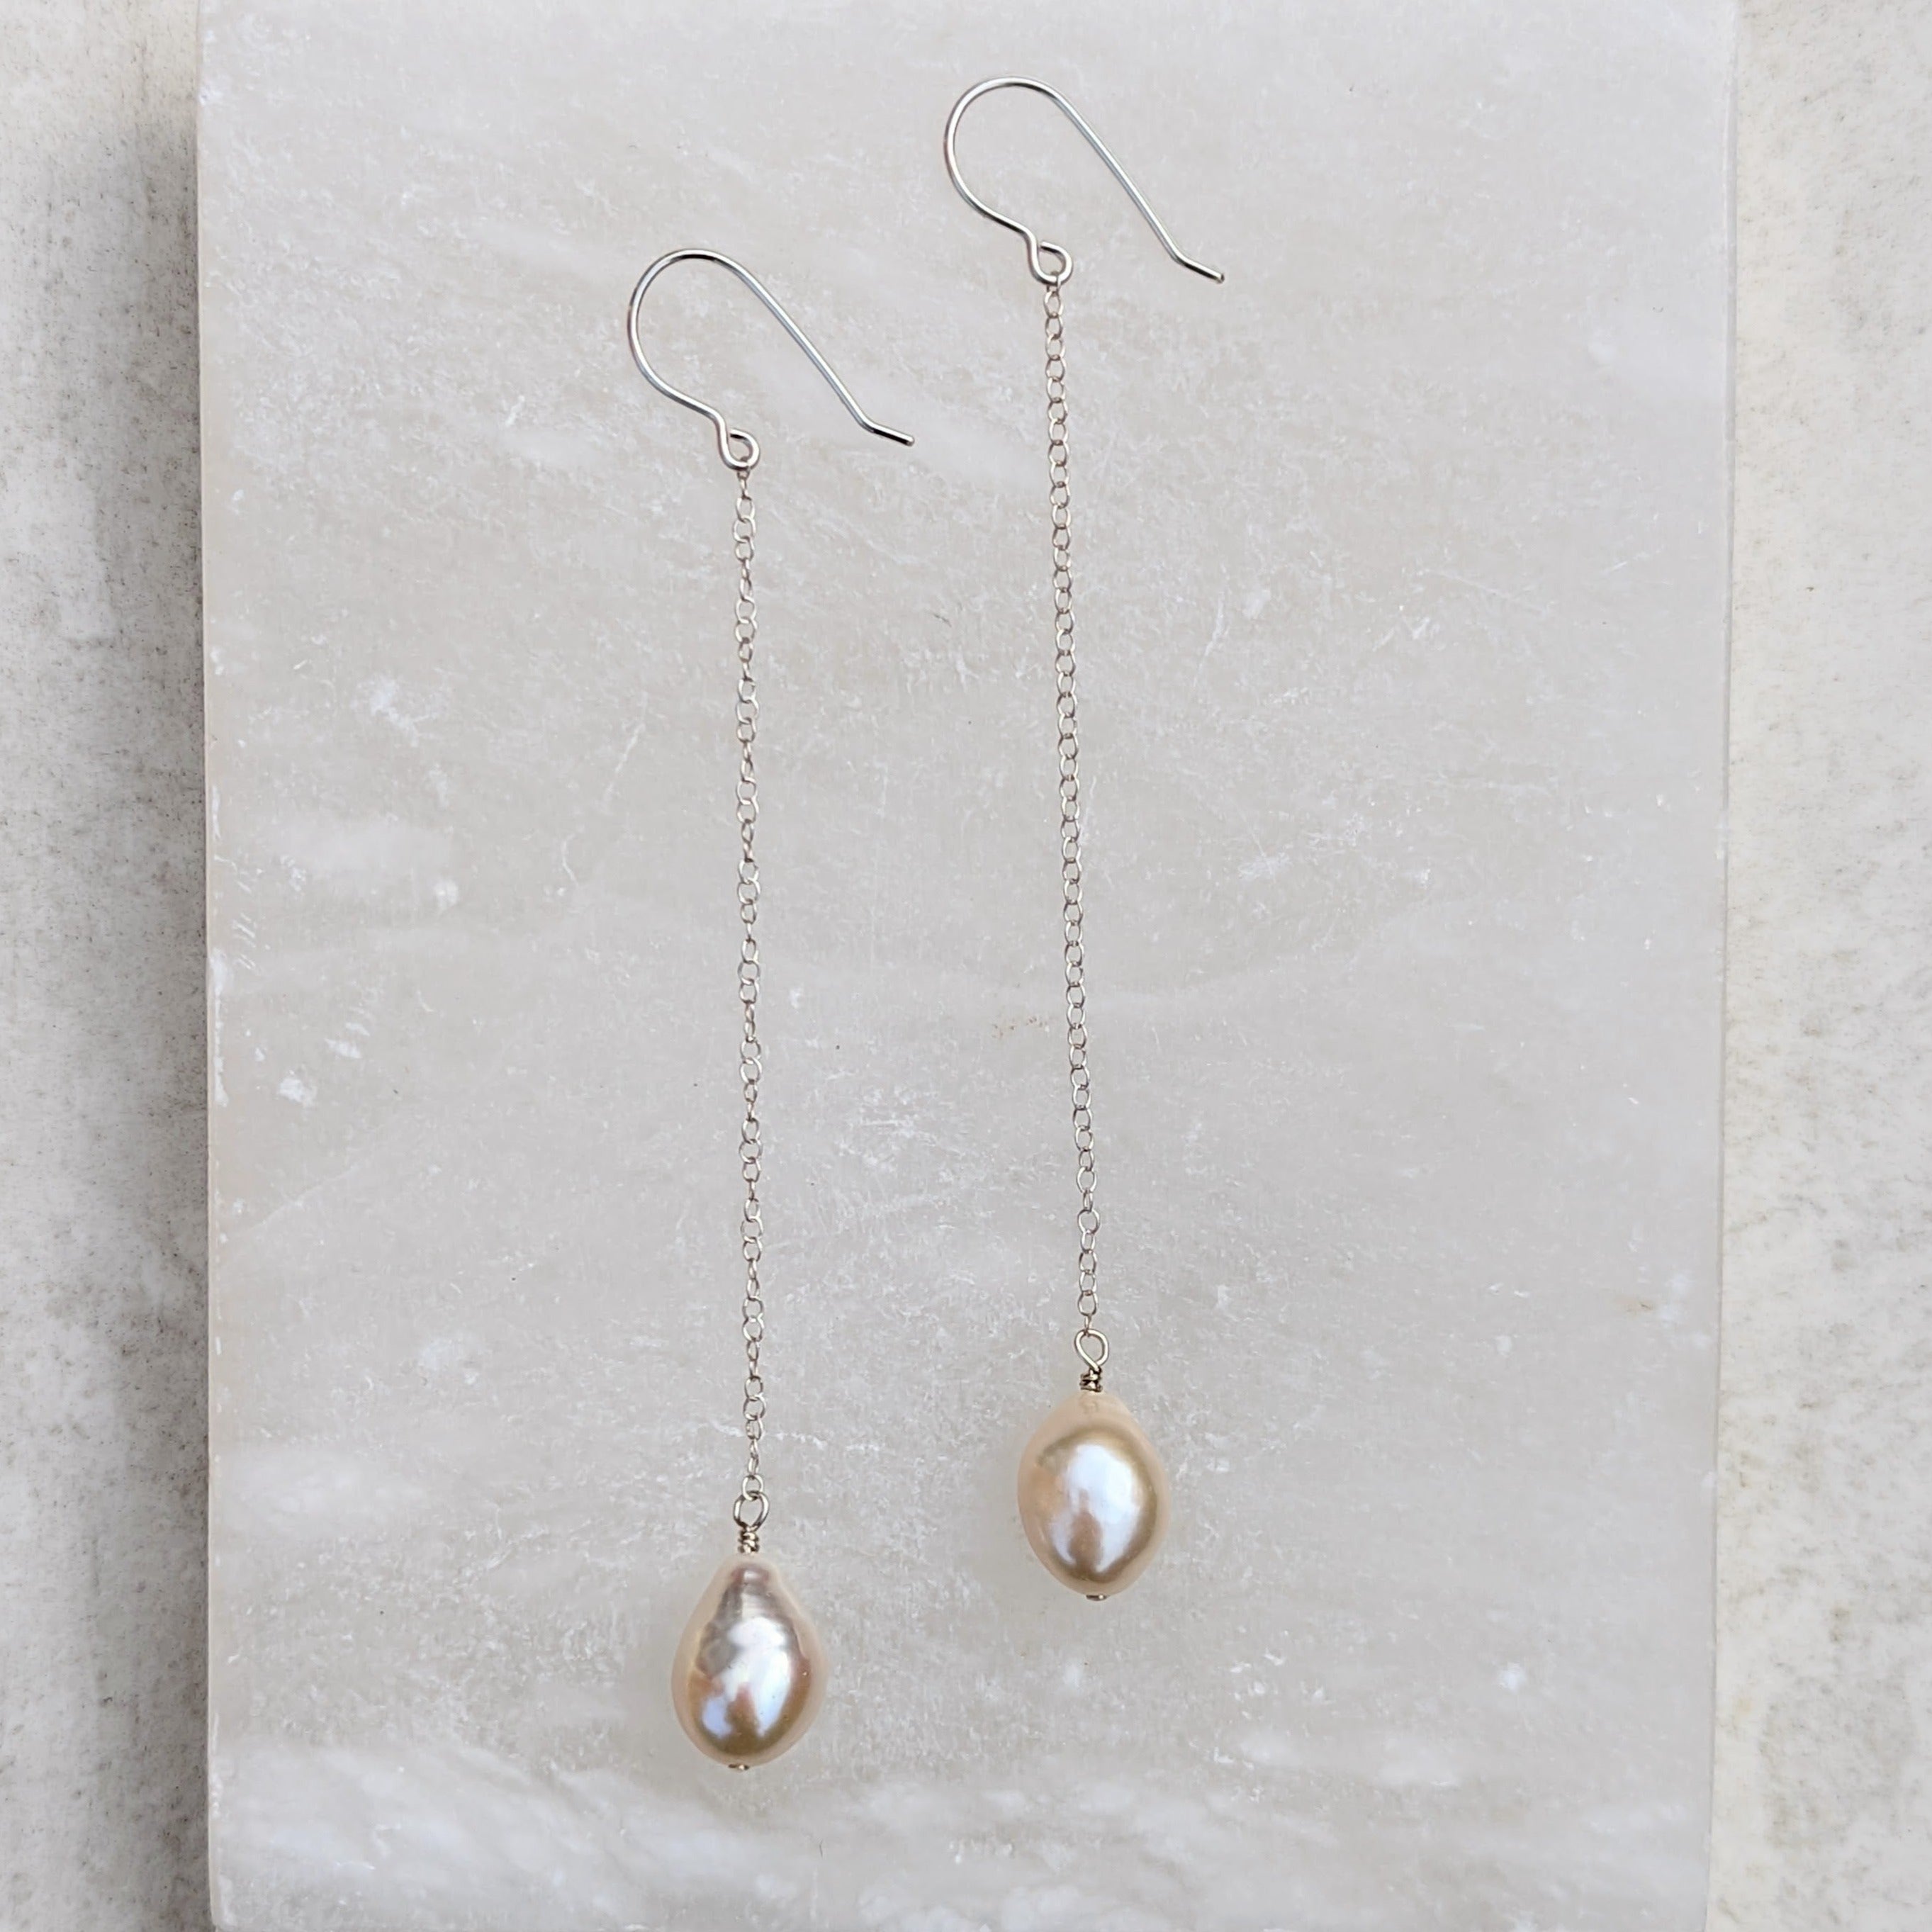 Pair of long chain pearl earring in sterling silver